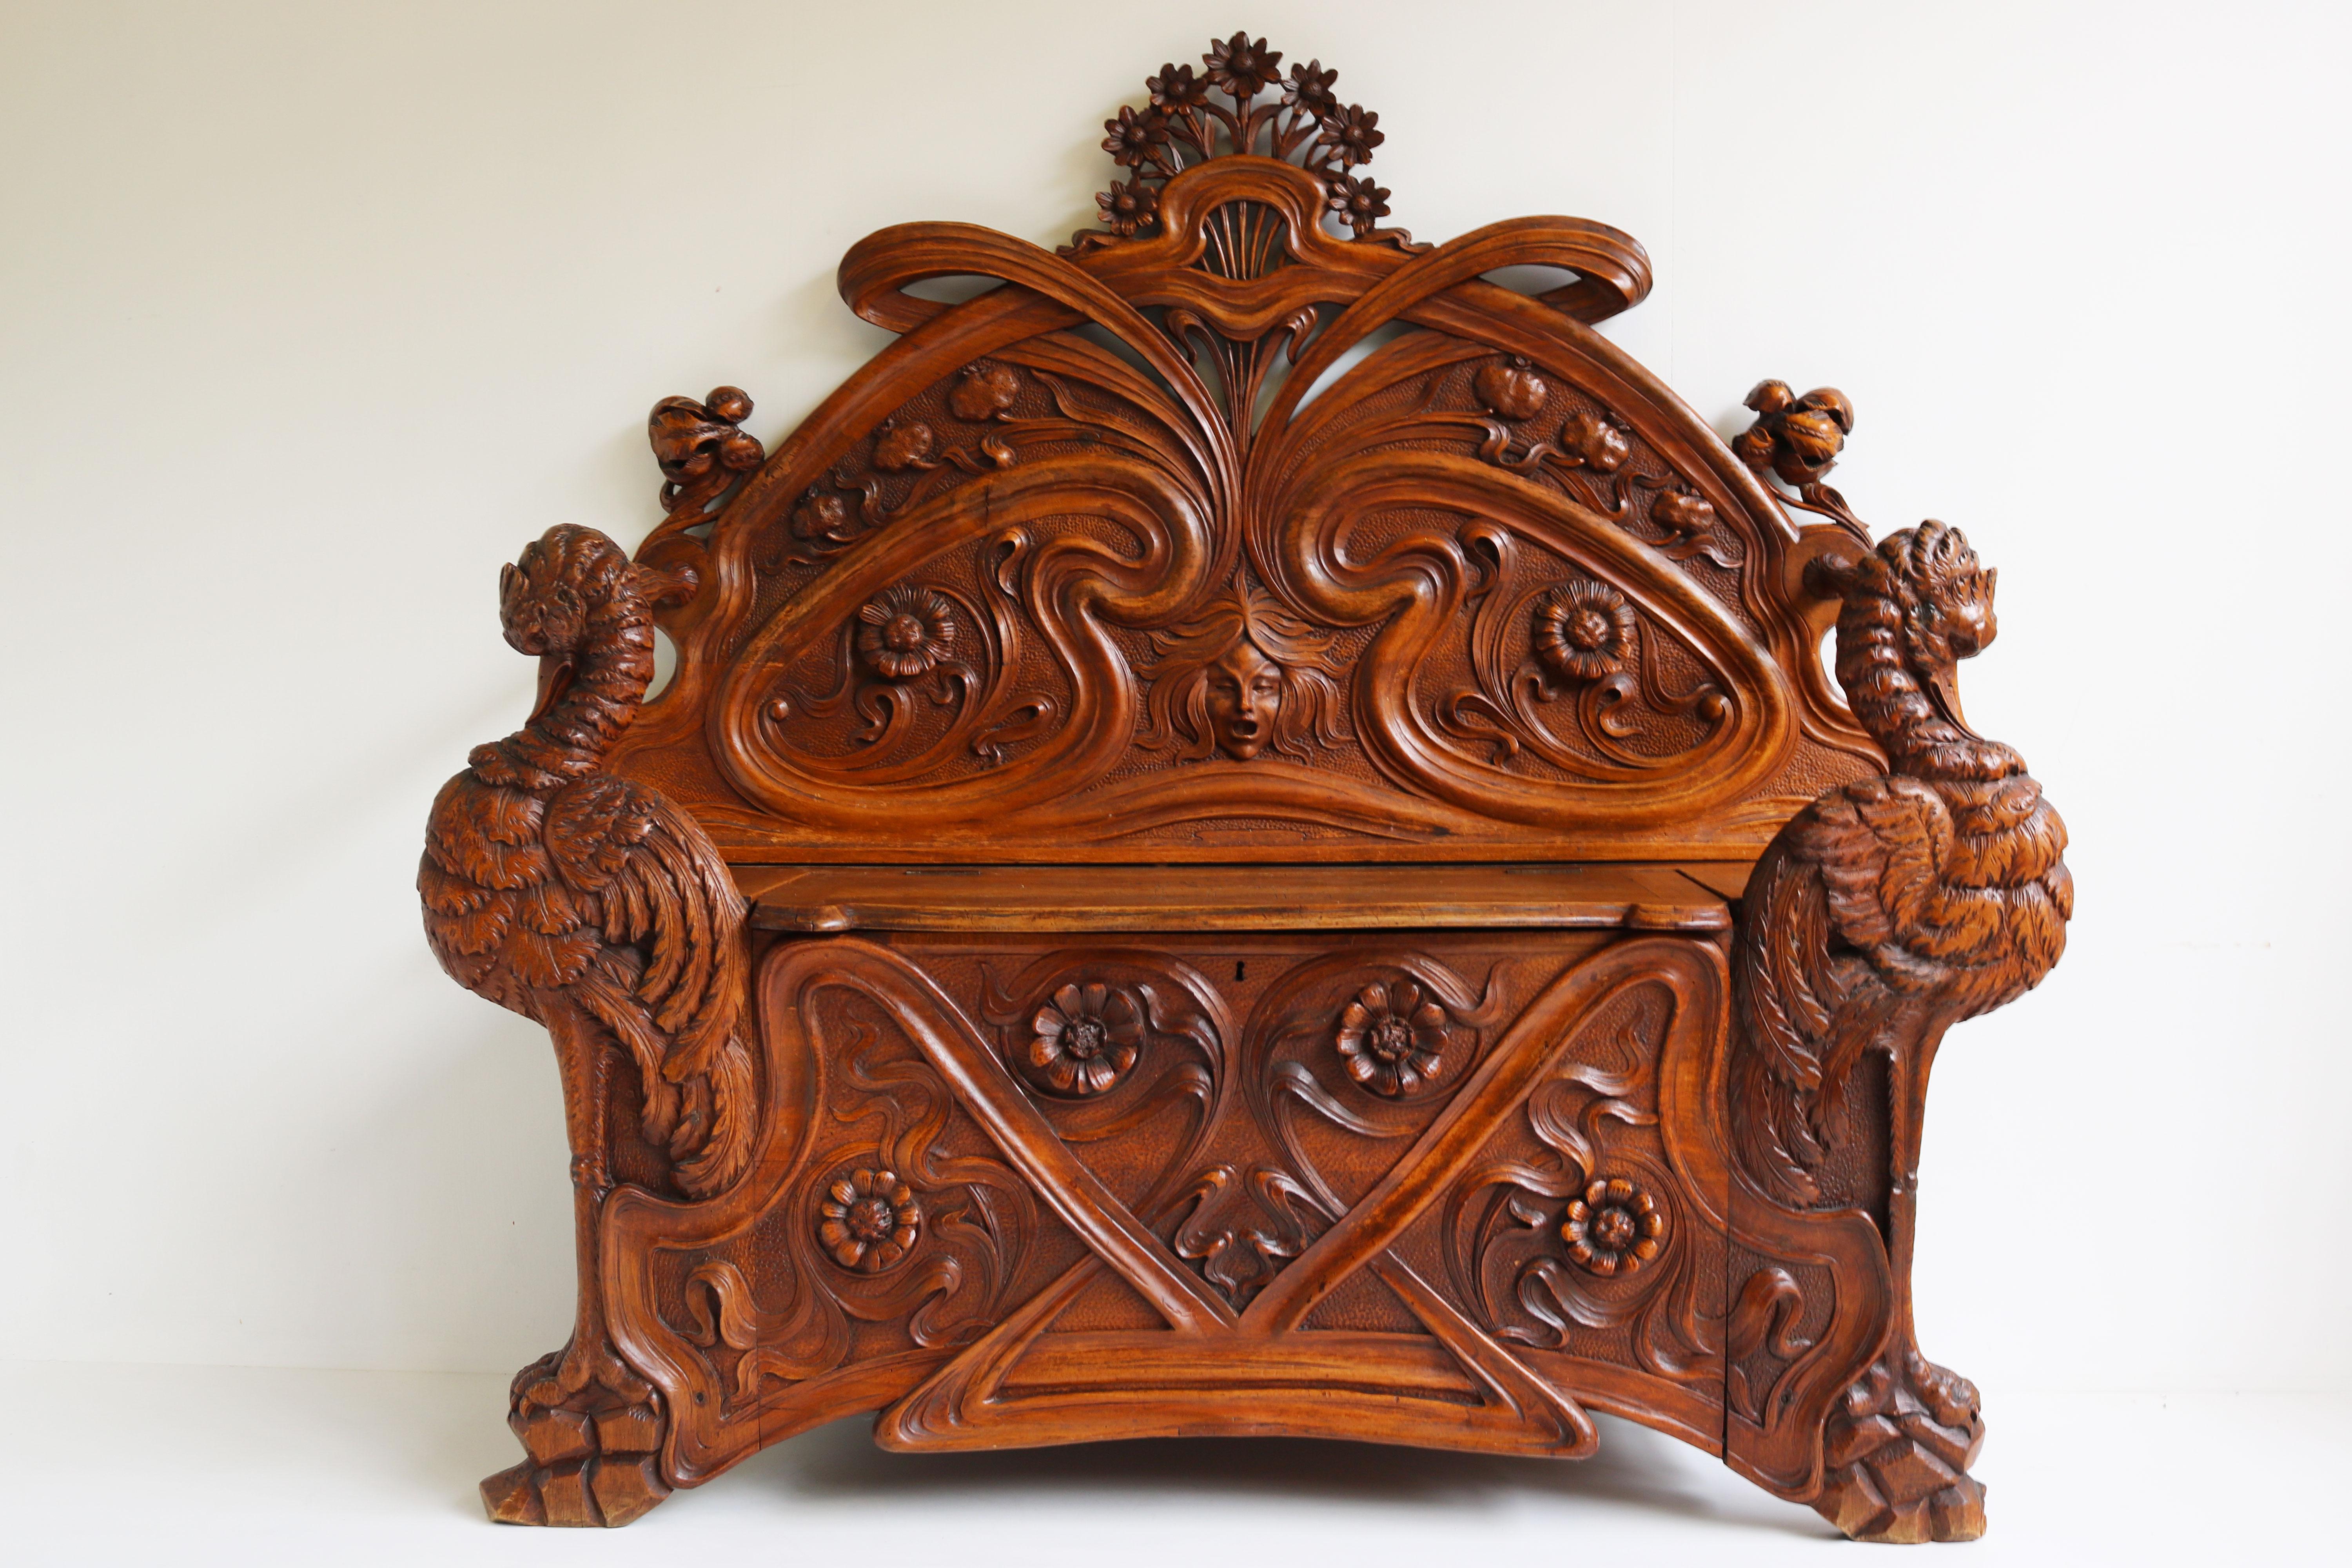 Hand-Carved Rare French Art Nouveau / Jugendstil Hall Bench Attributed to Louis Majorelle